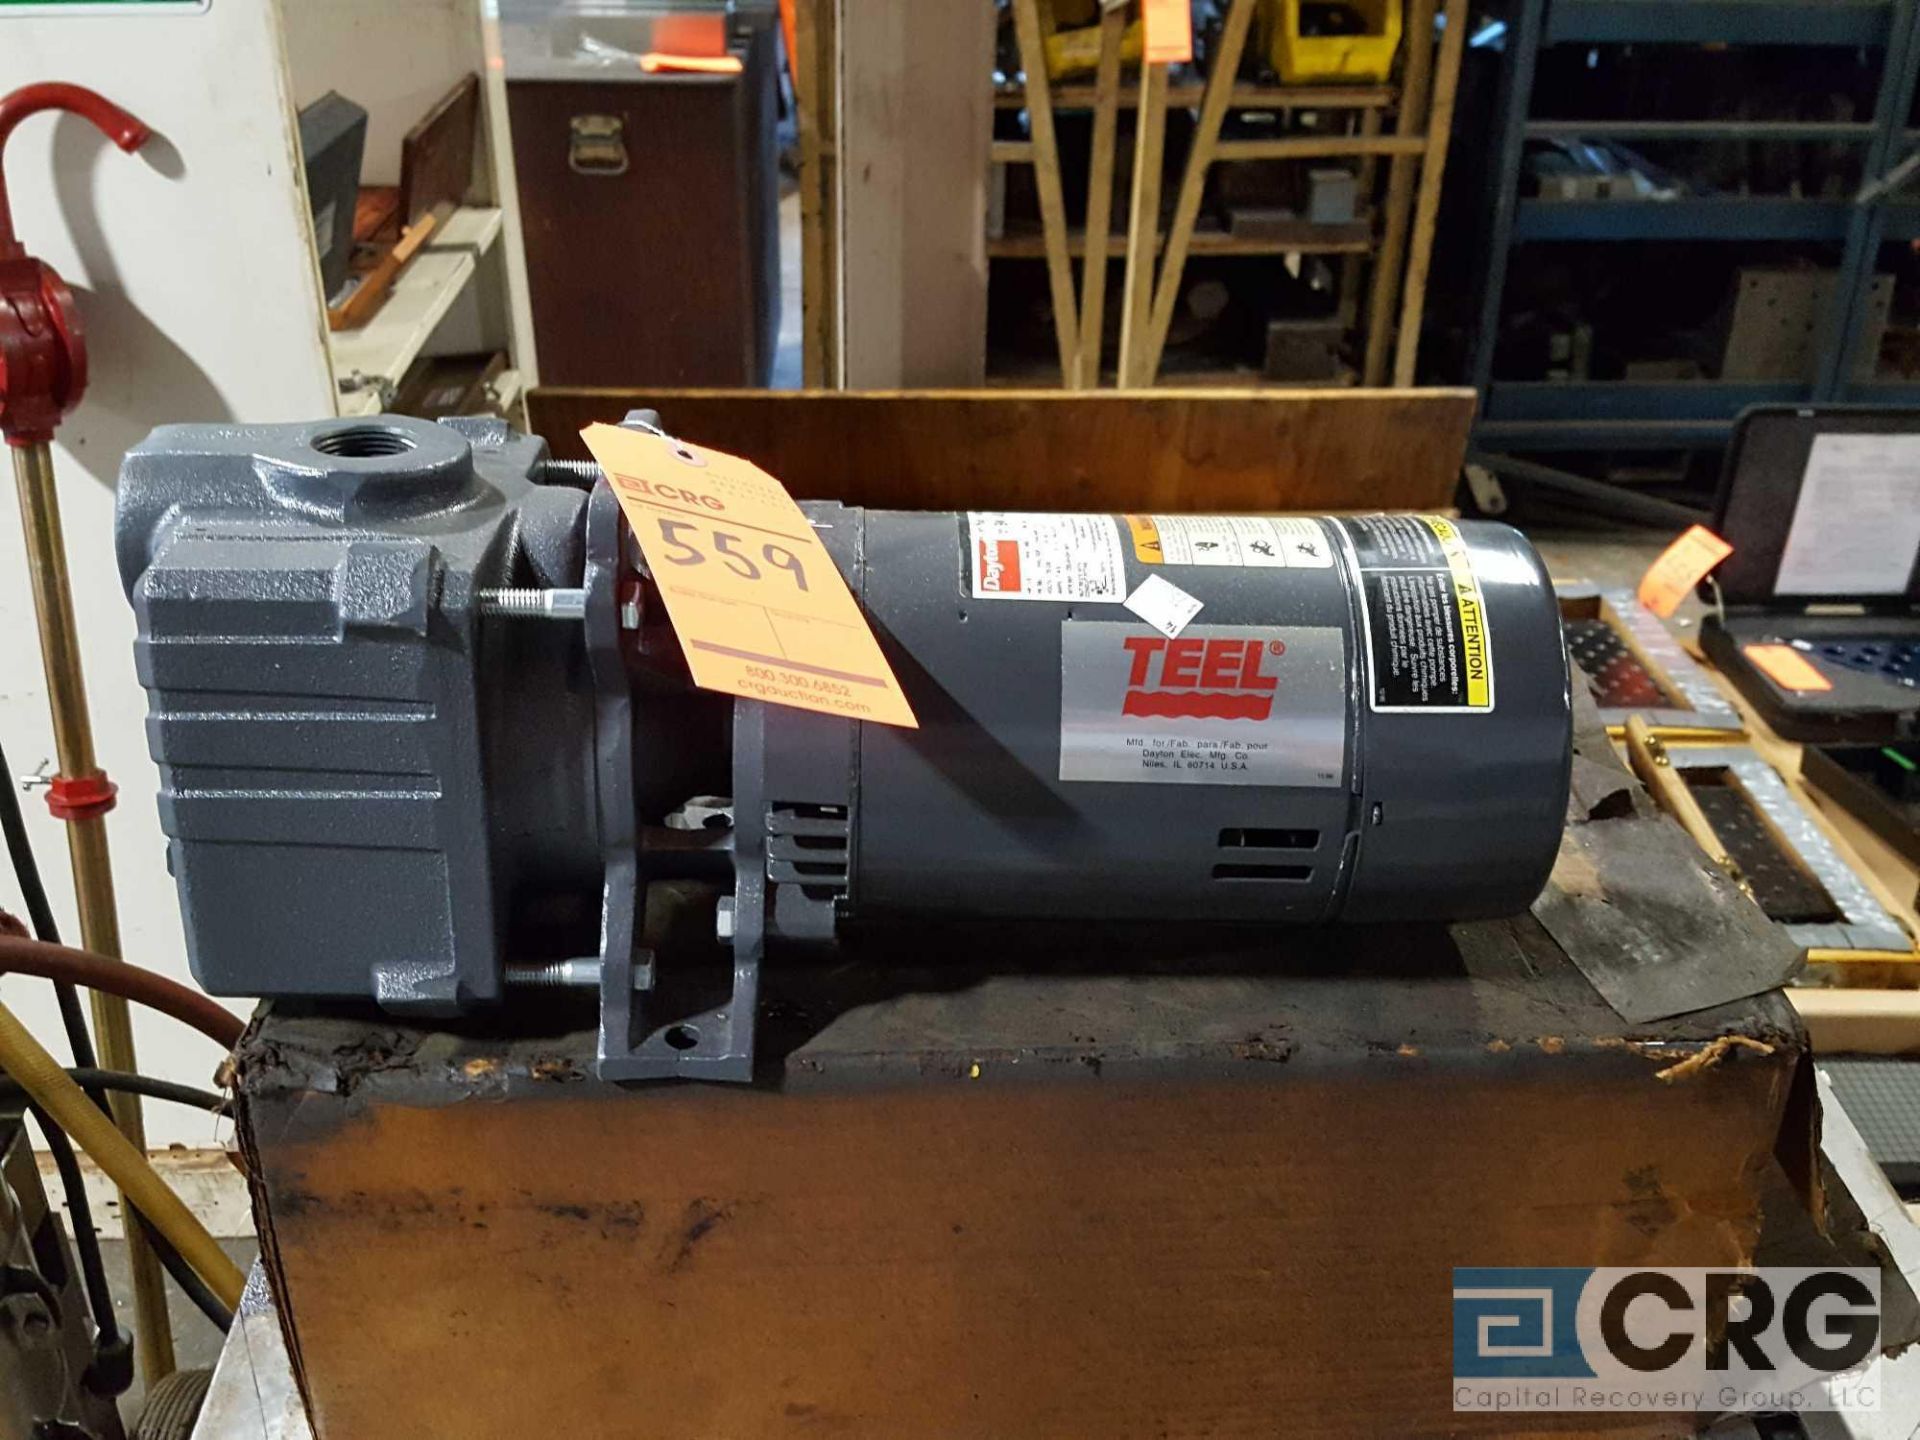 Teel centrifugal pump, model 2891-V5, new, never used, original box is in cabinet, with manuals